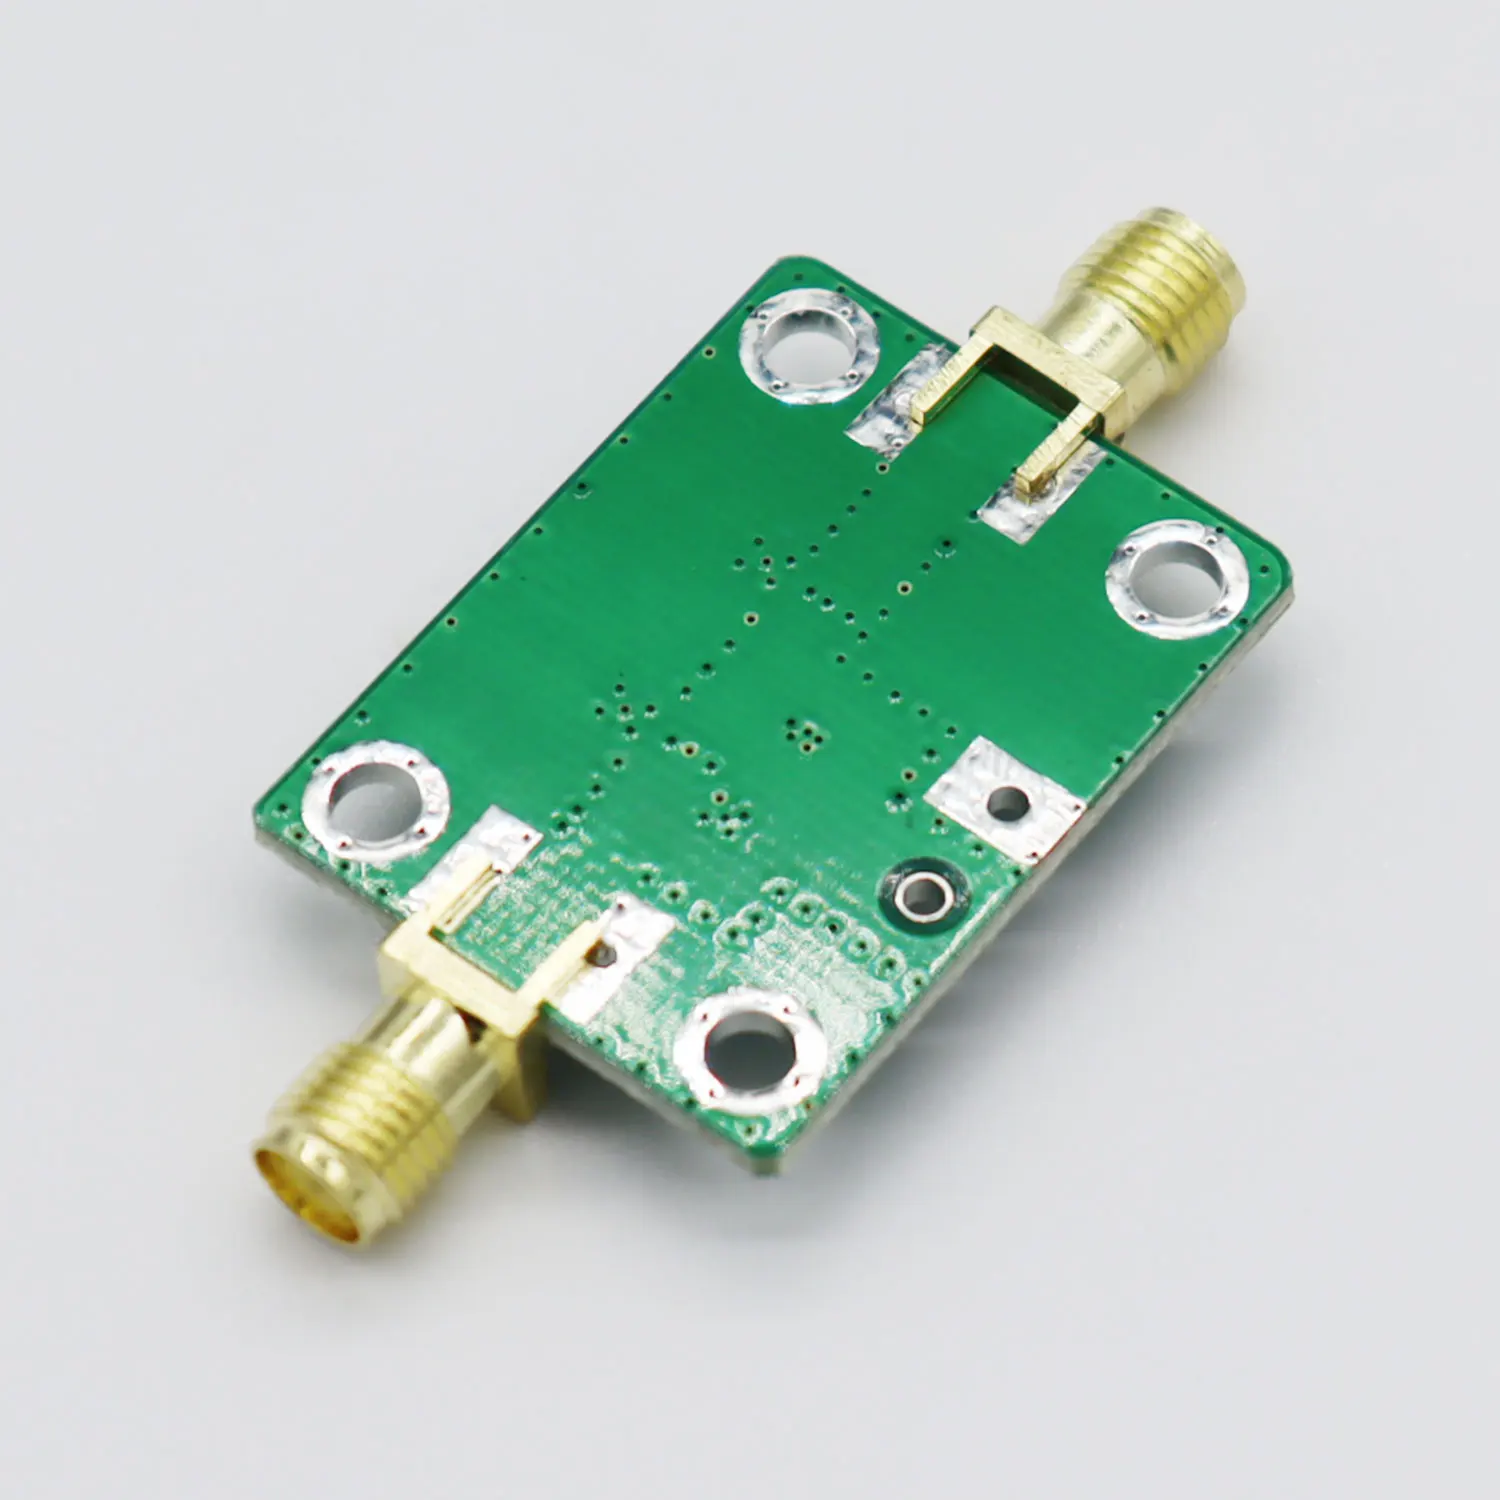 LNA Wide Band 50-4000Mhz RTL-SDR